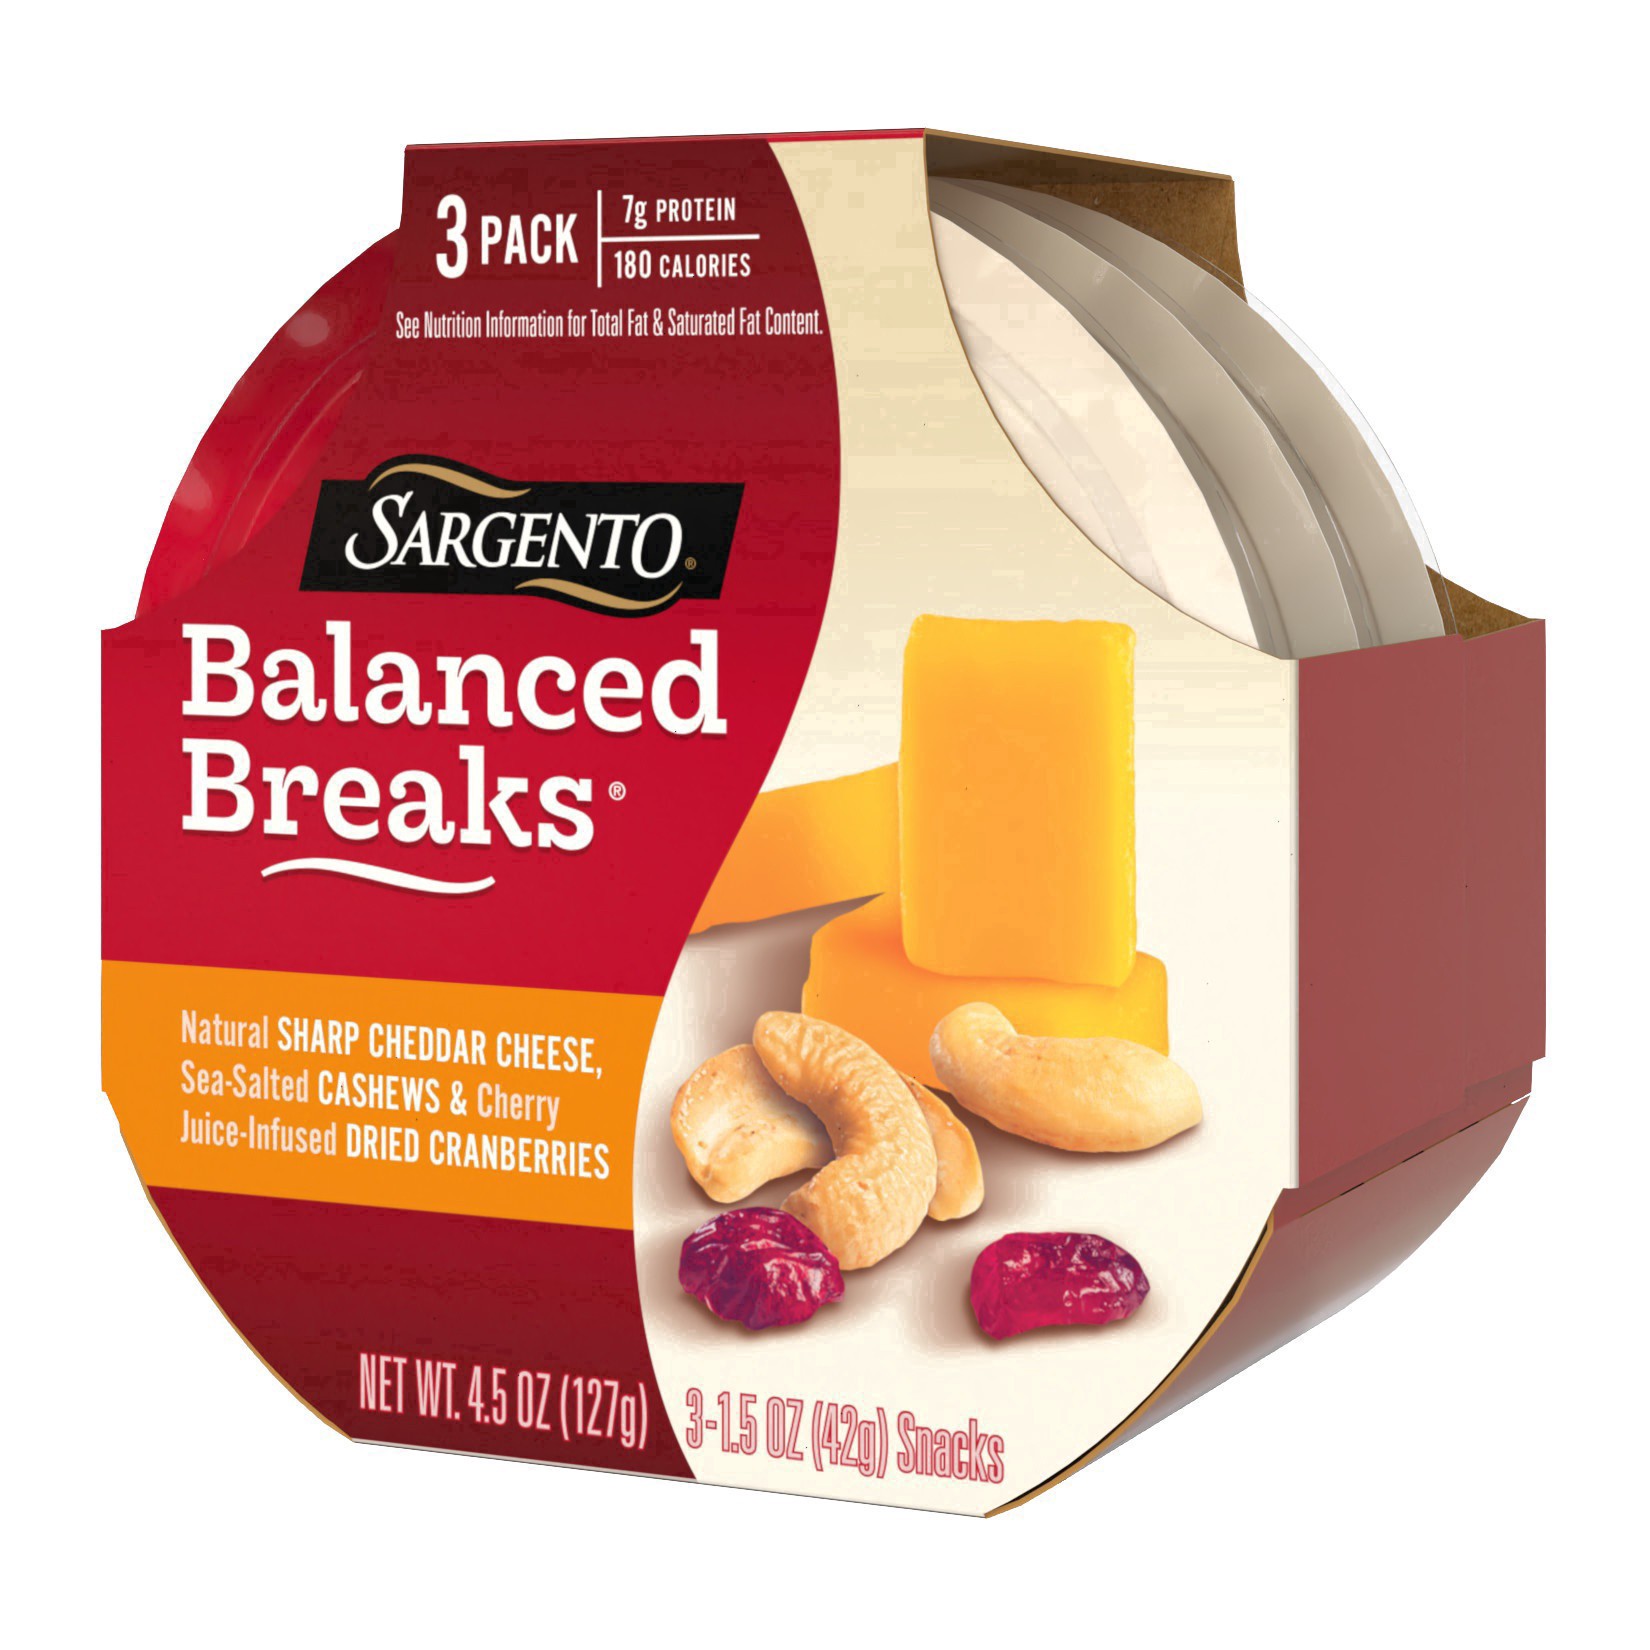 slide 6 of 34, Sargento Balanced Breaks with Natural Sharp Cheddar Cheese, Sea-Salted Cashews and Cherry Juice-Infused Dried Cranberries, 1.5 oz., 3-Pack, 3 ct